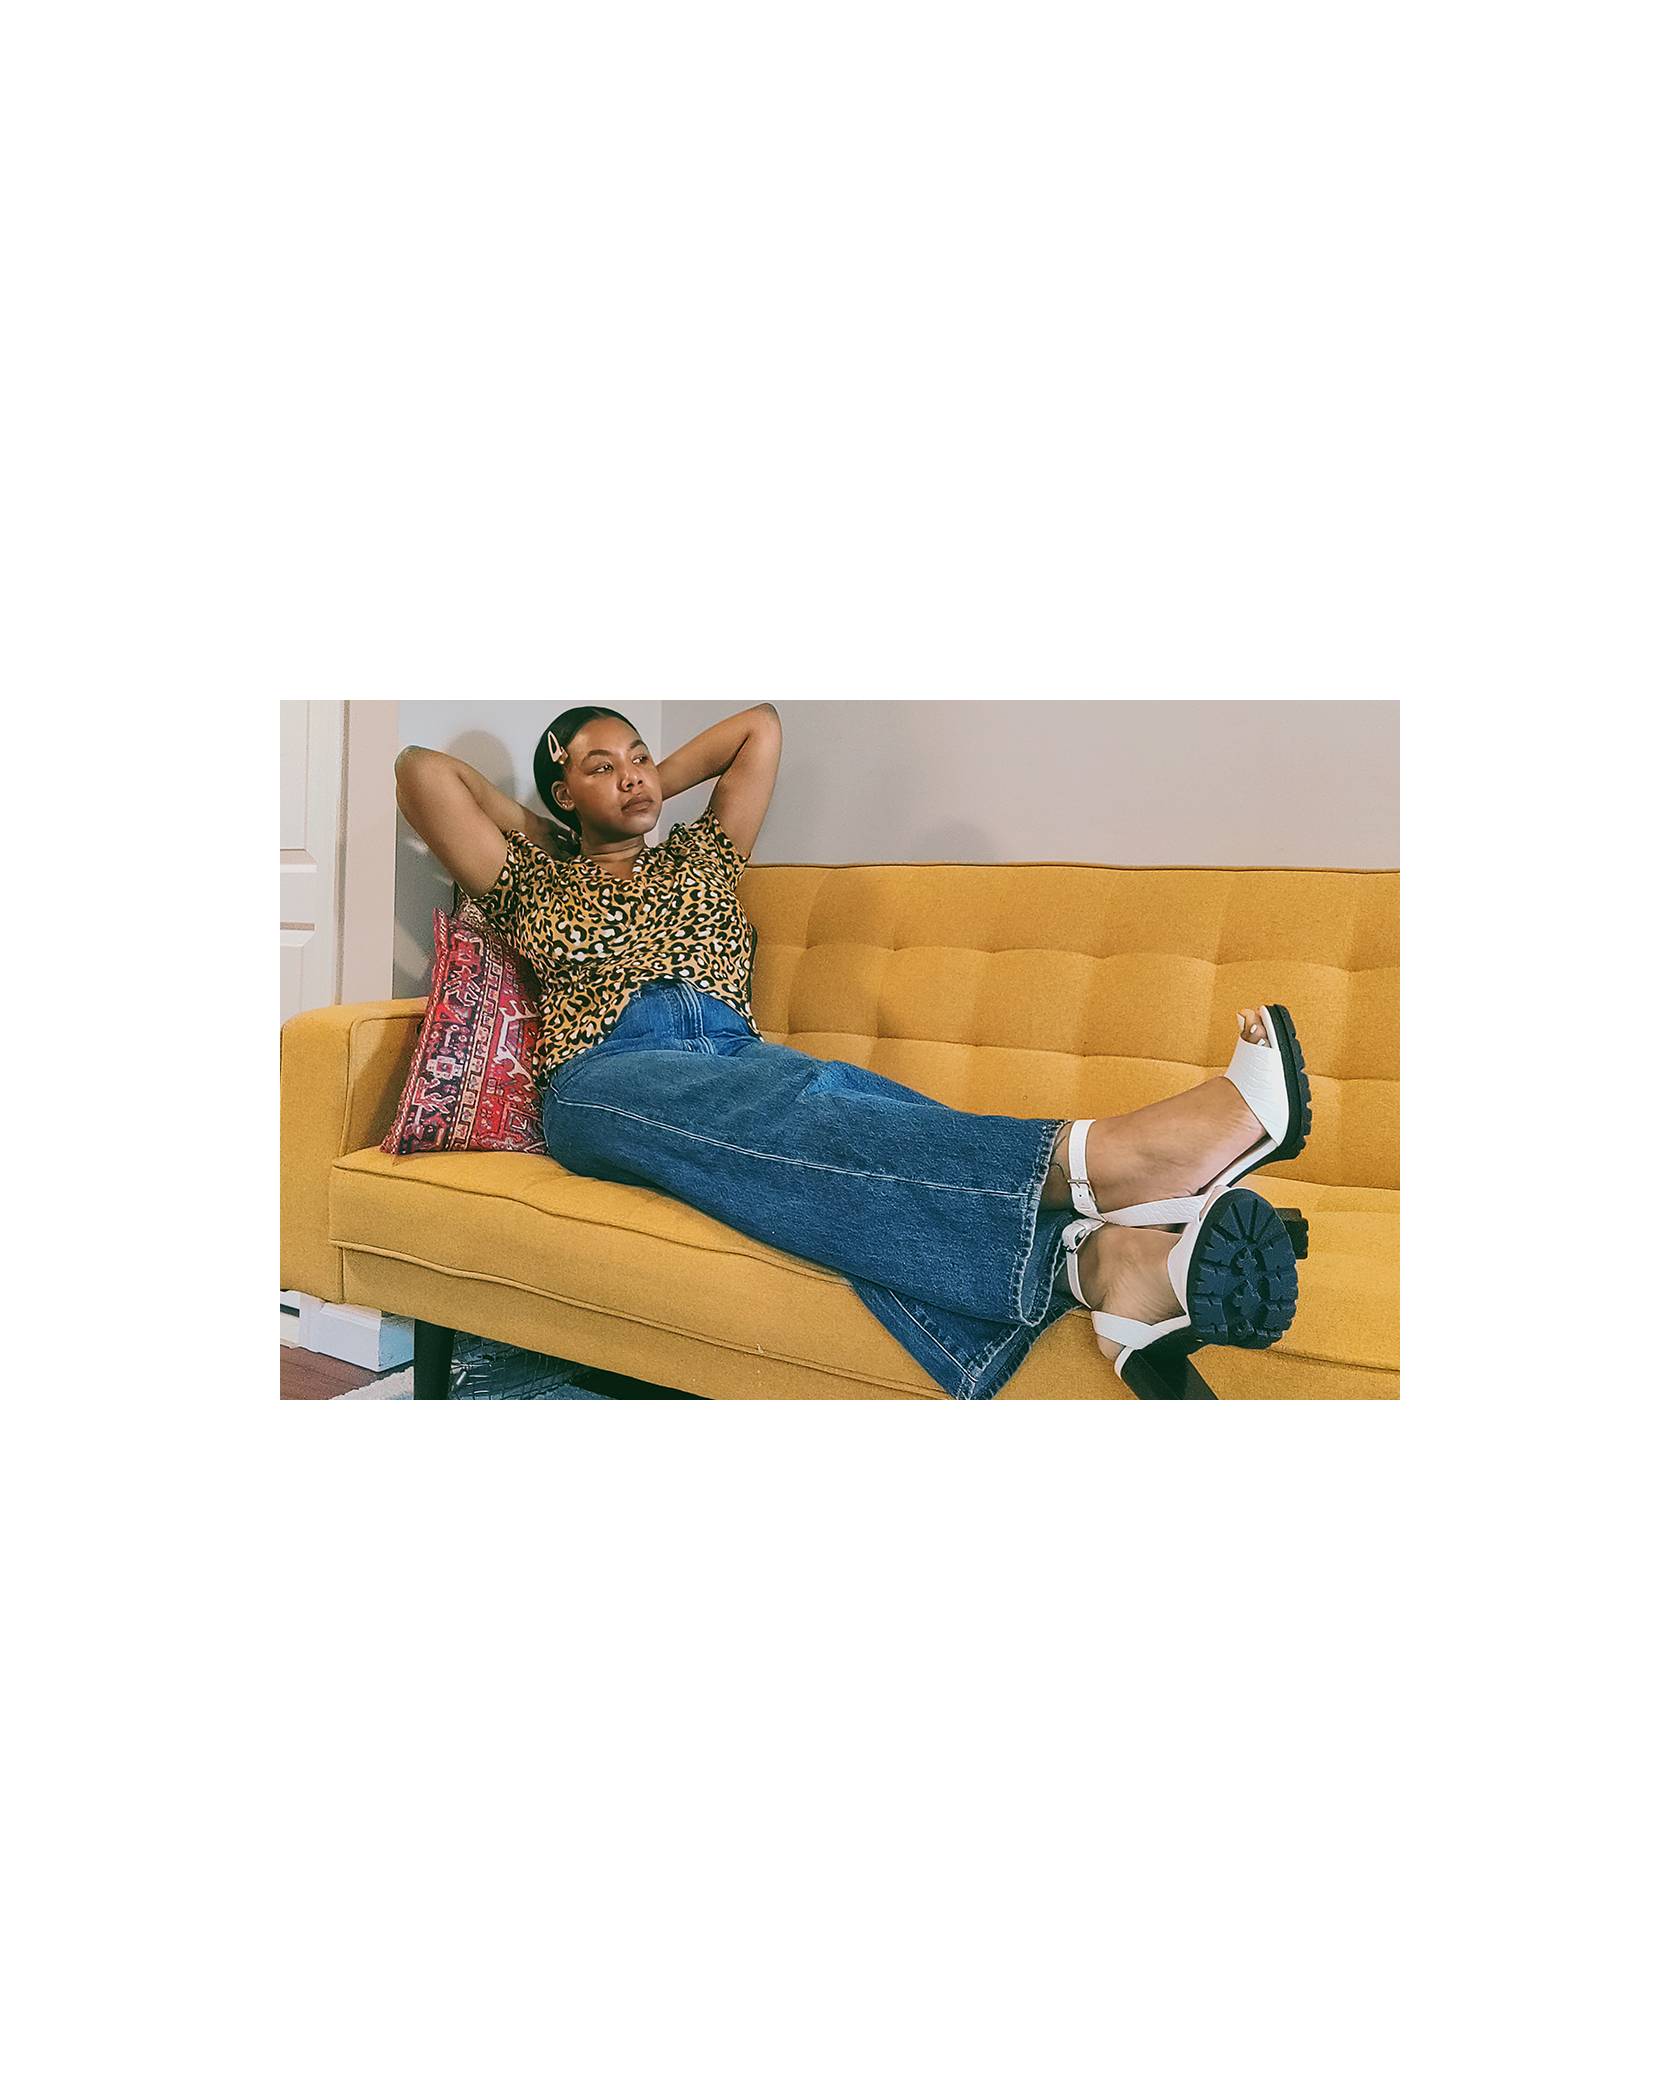 Photo of Natasia Berry sitting on a mustard yellow couch. She is wearing a leopard print shirt, Levi's jeans, and white heels.